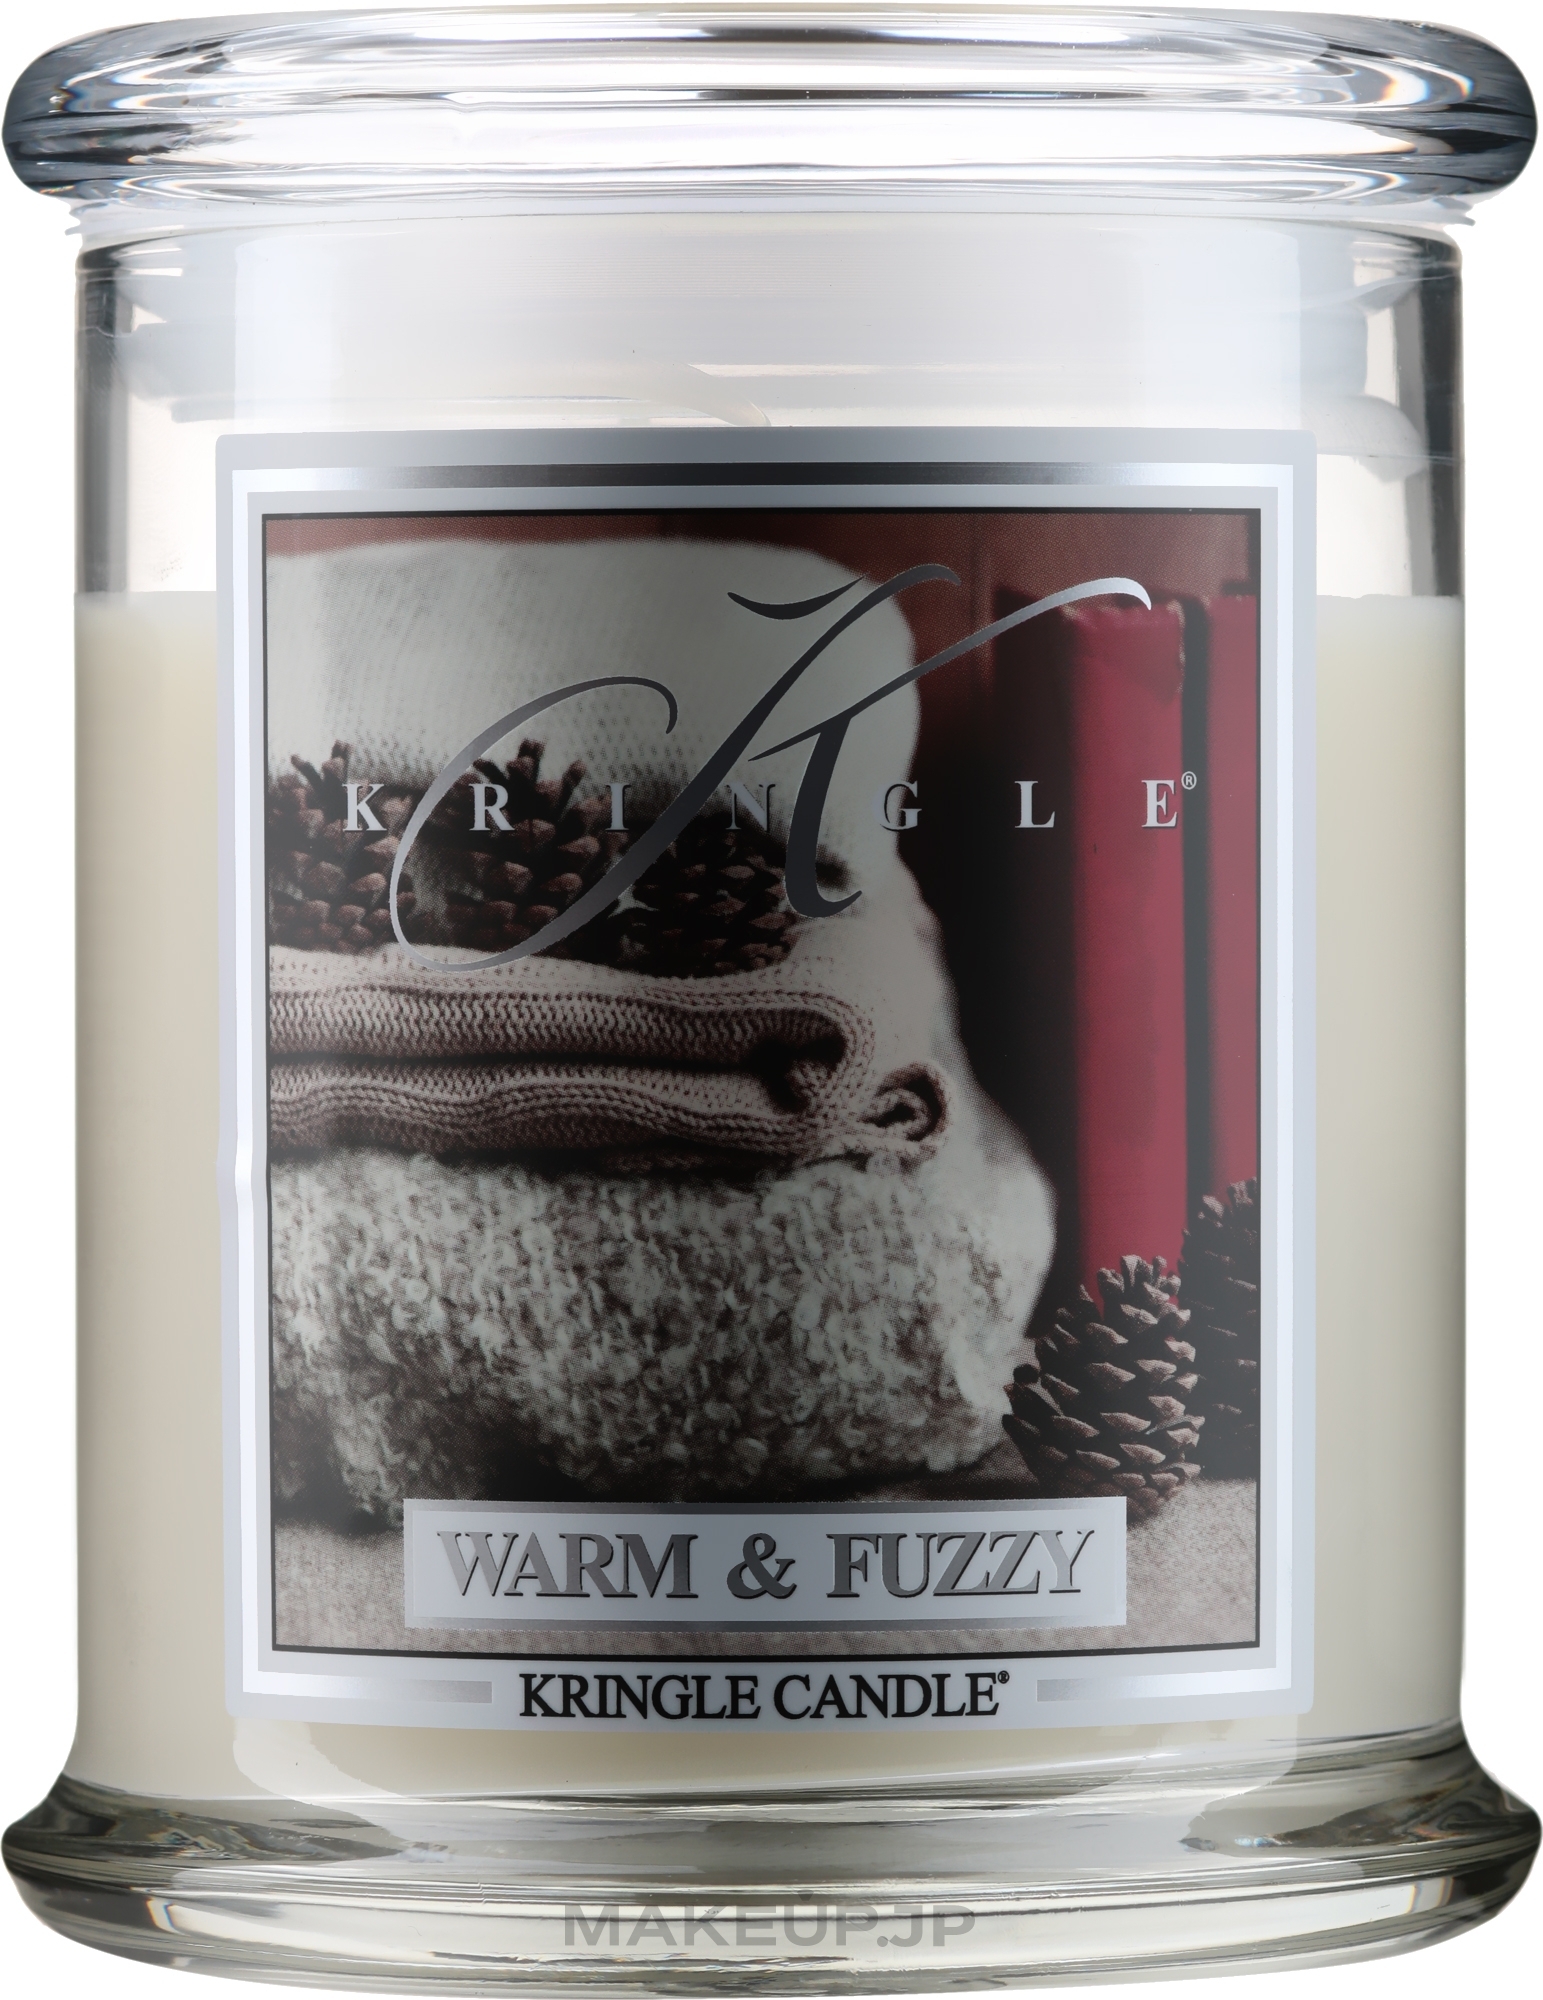 Scented Candle in Jar - Kringle Candle Warm & Fuzzy — photo 411 g